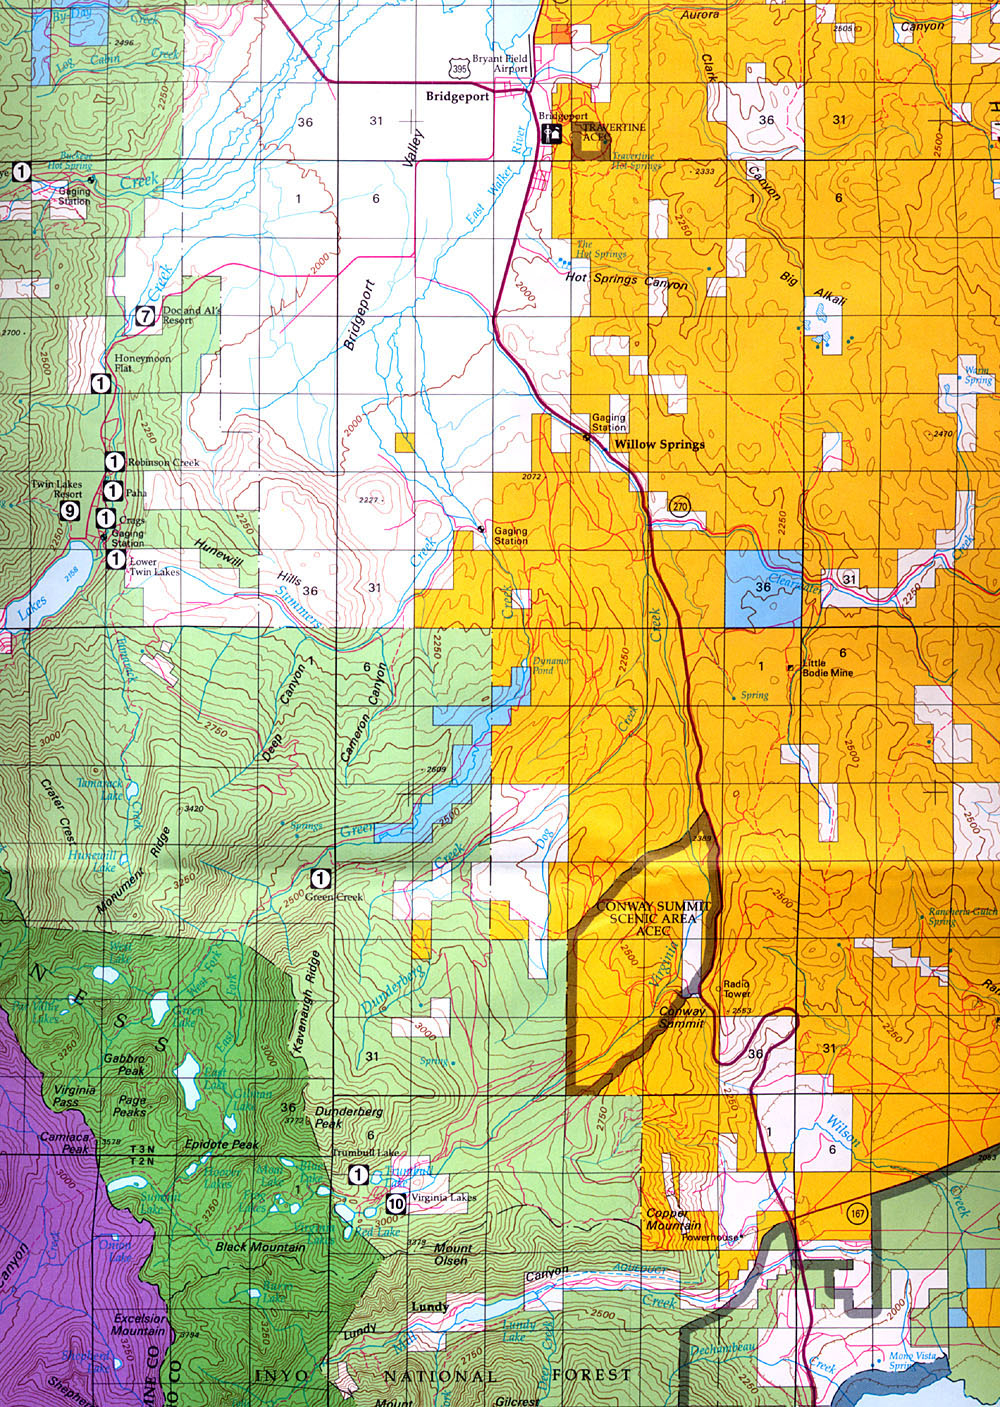 Buy And Find California Maps: Bureau Of Land Management: Northern - Blm Hunting Maps California